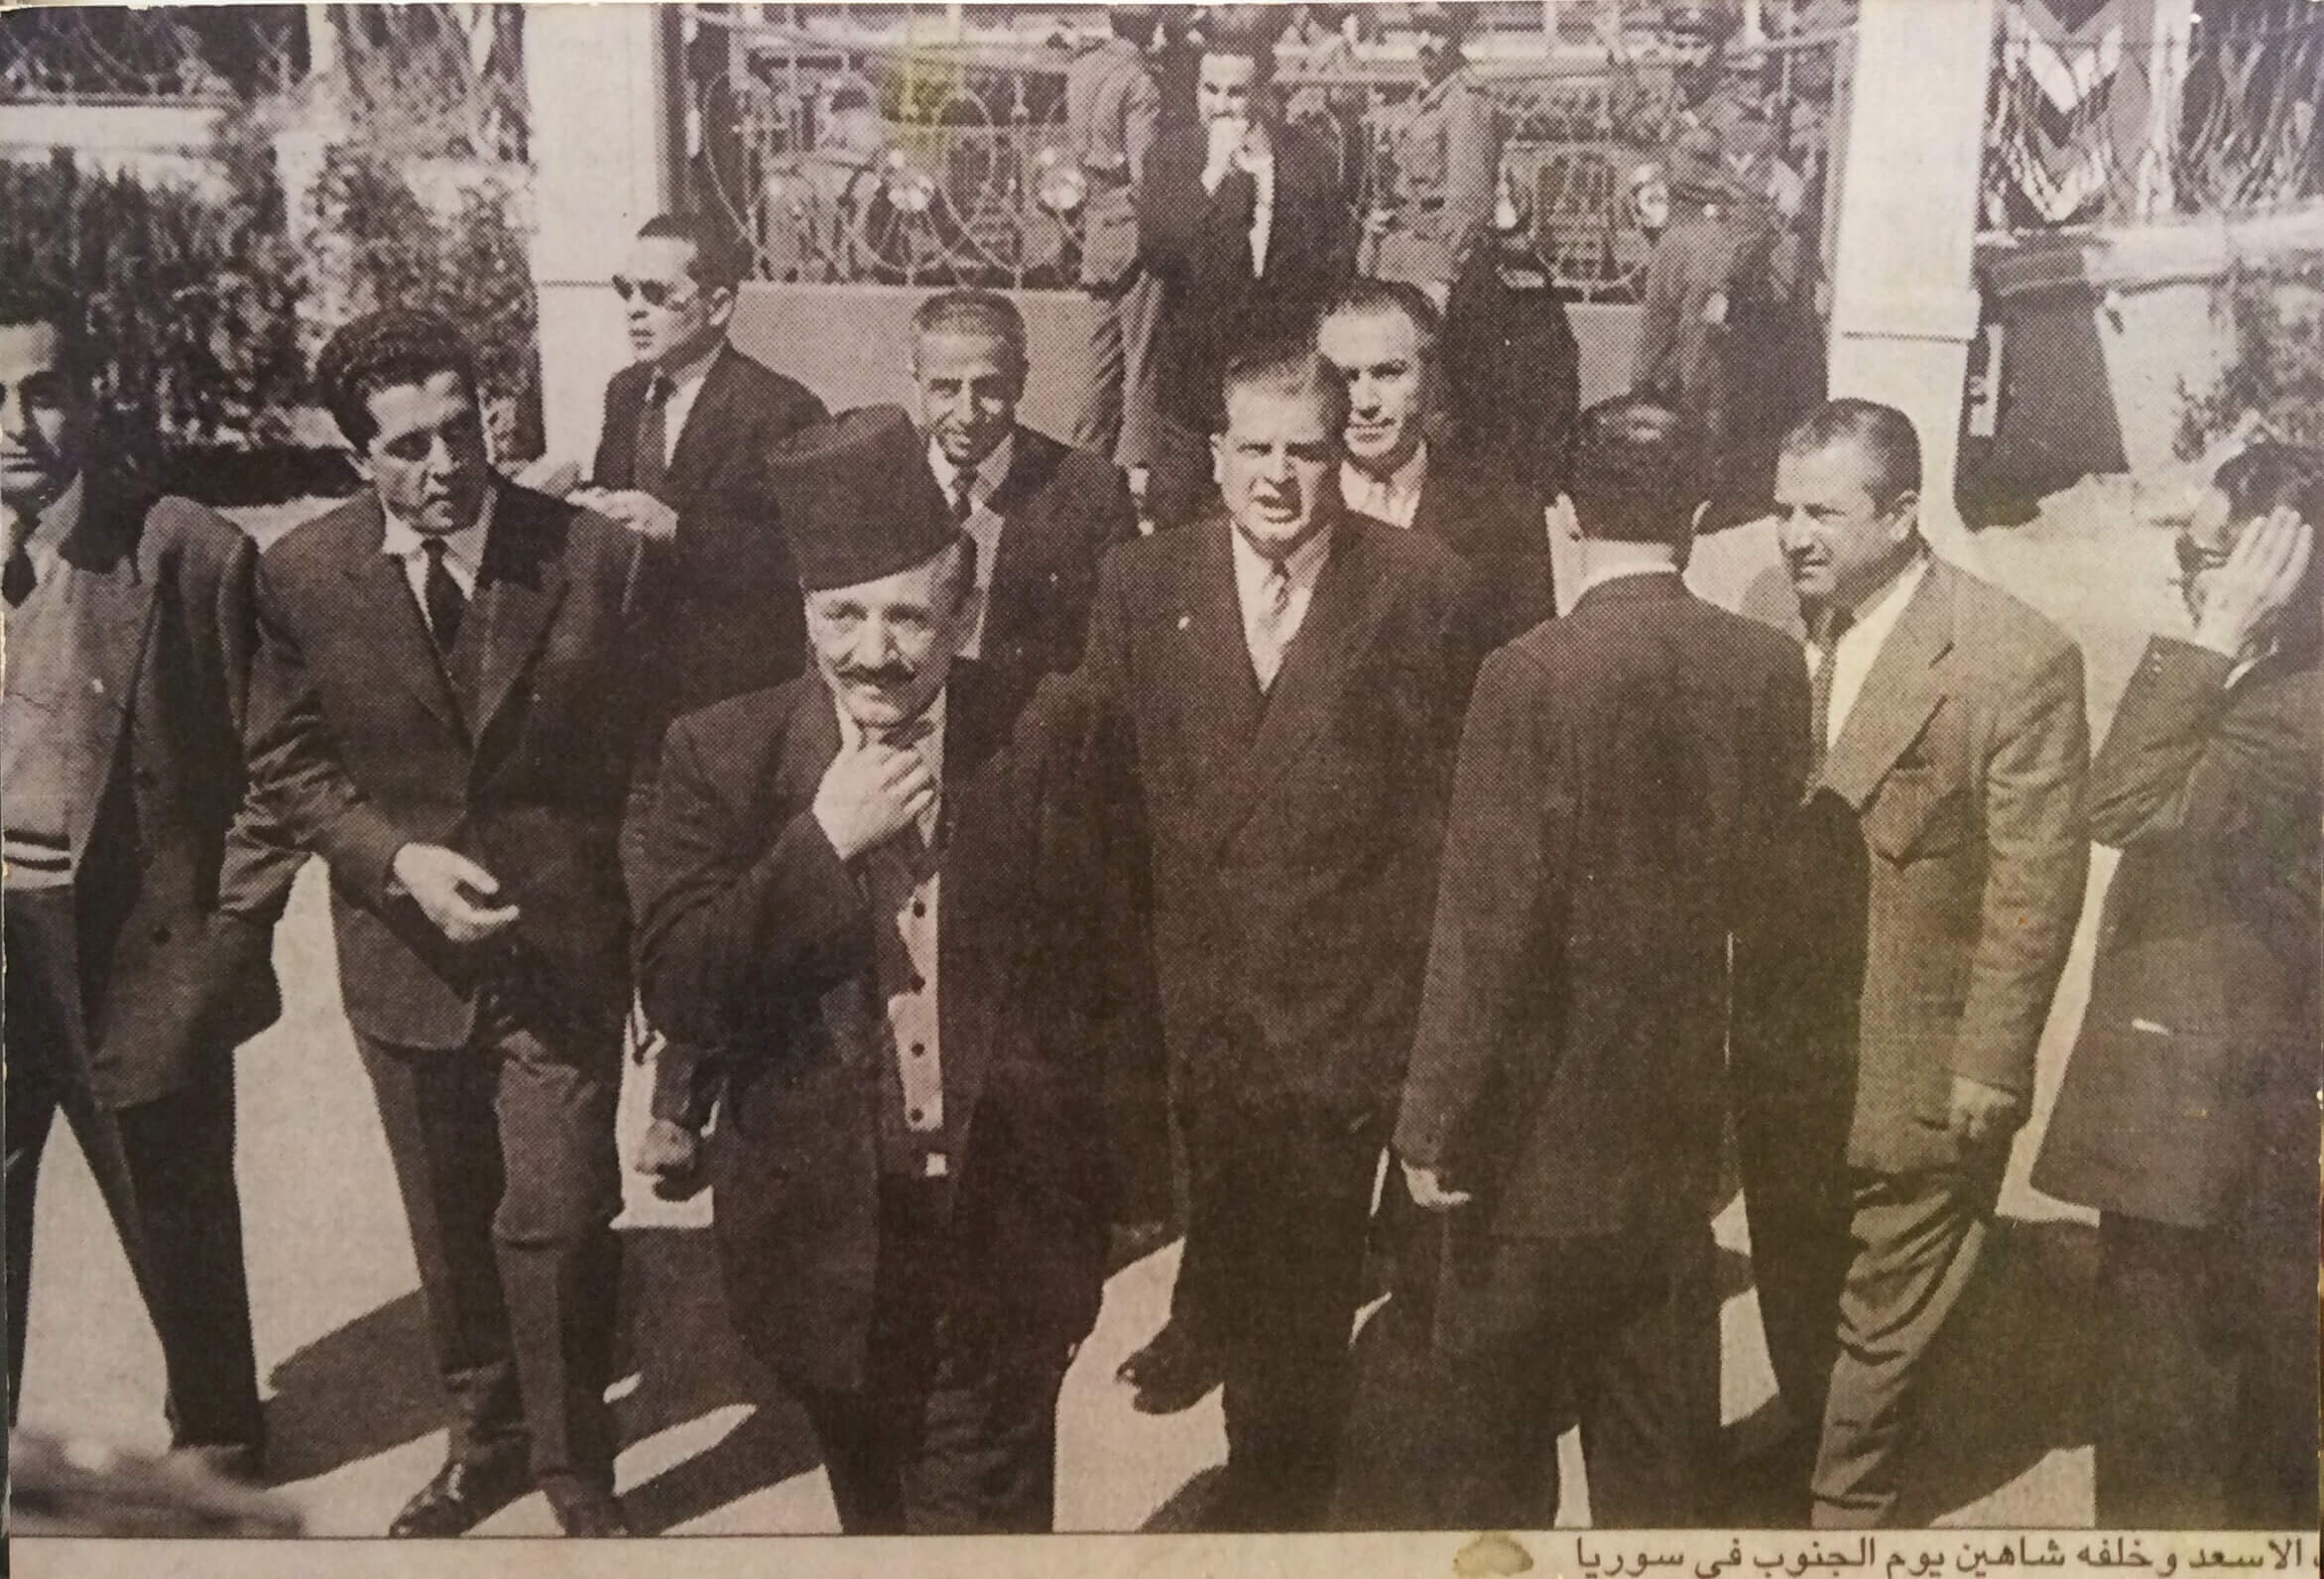 Shukrallah Karam seen right behind Ahmad & Kamel el Asaad (father & son, both speakers of parliament house) a delegation to welcome President of the United Arab republic Gamal Abdel Nasser's visit to Damascus, 1958. 